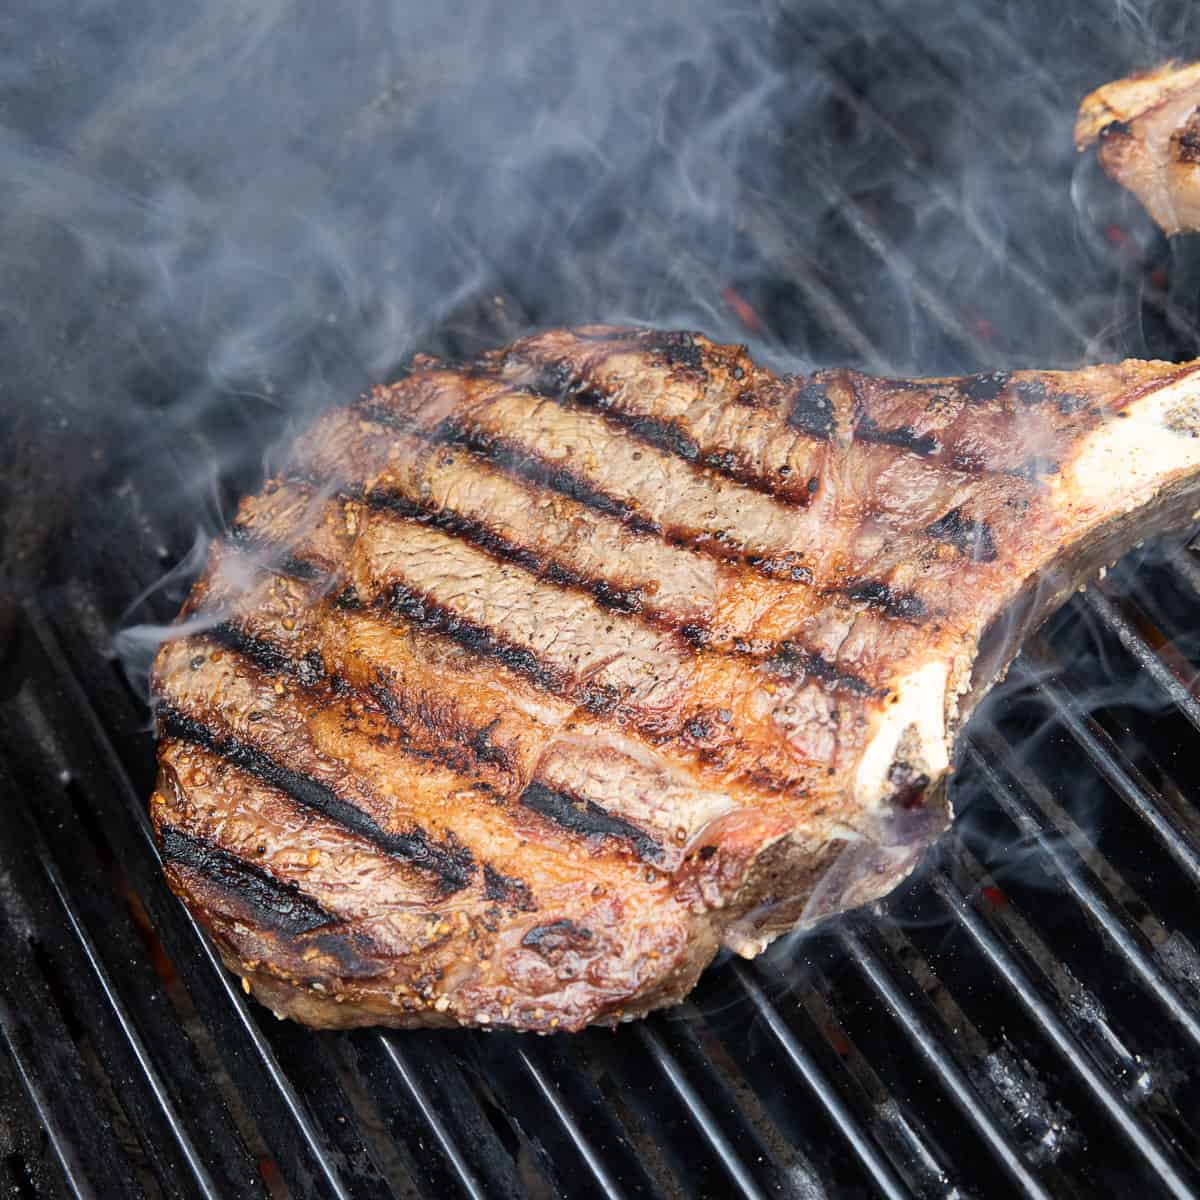 Grill the steak on the charcoal grill on both sides. 